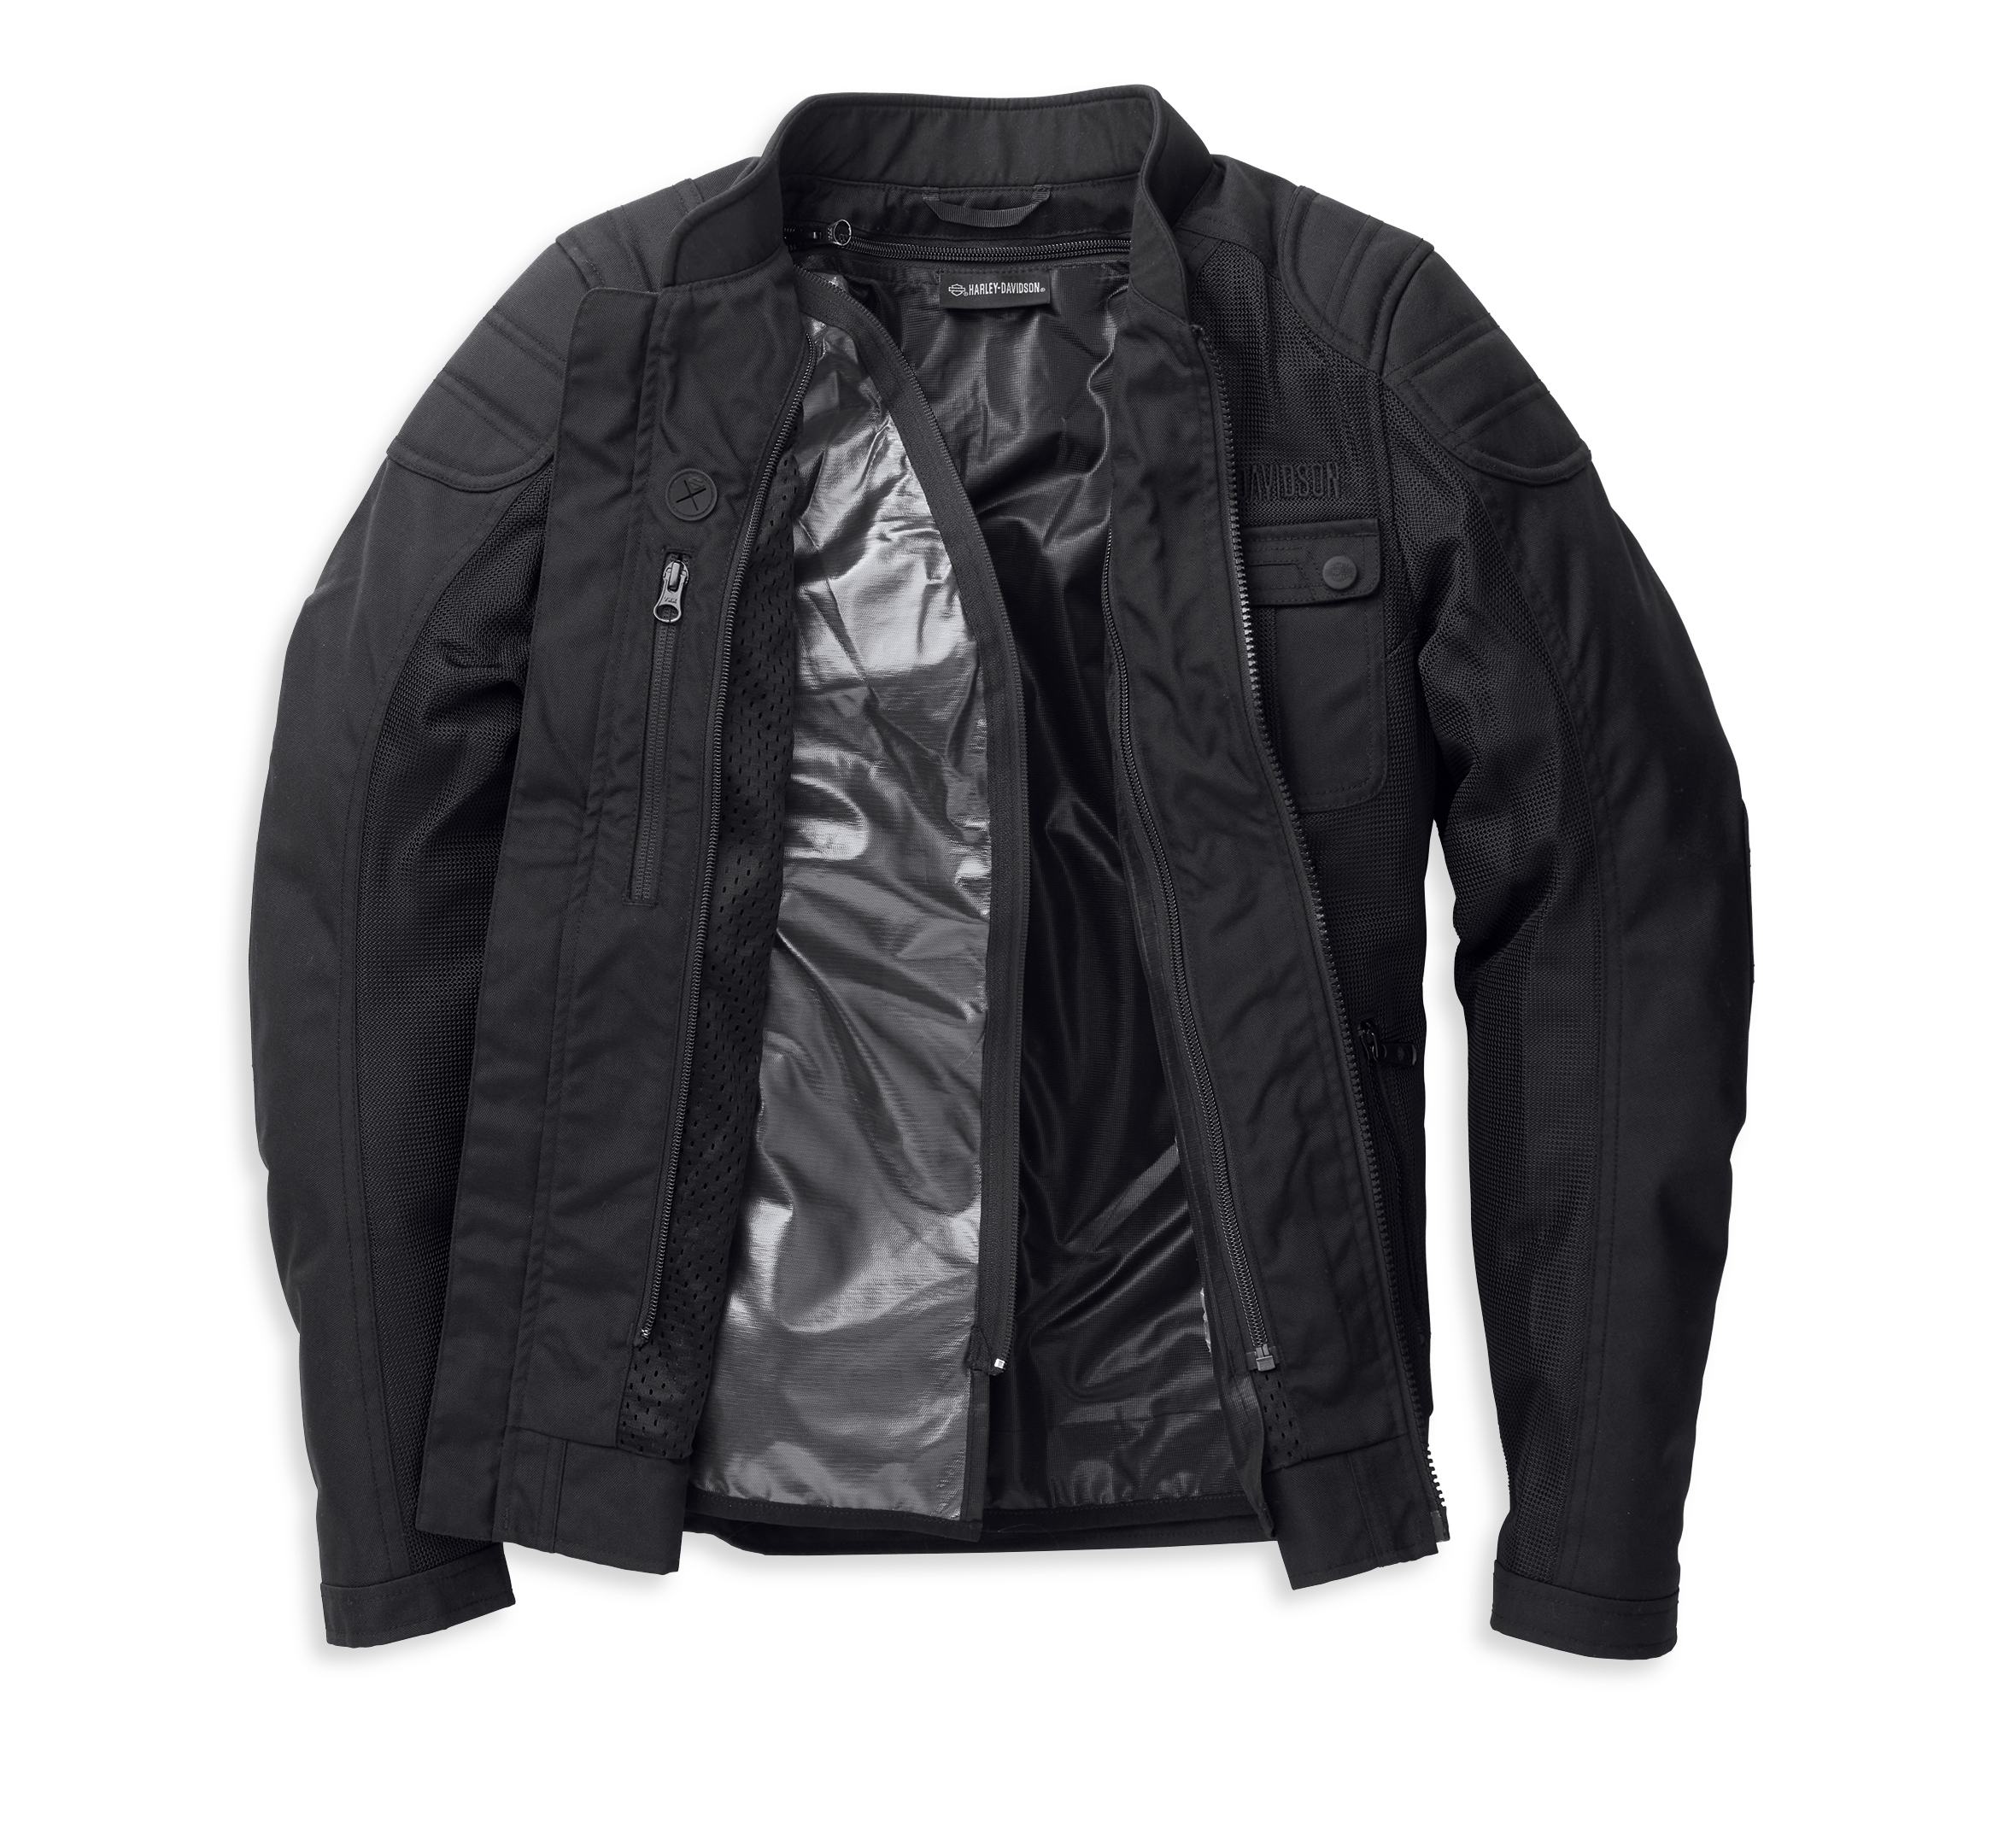 Women's Zephyr Mesh Riding Jacket w/ Zip-out Liner | Harley 